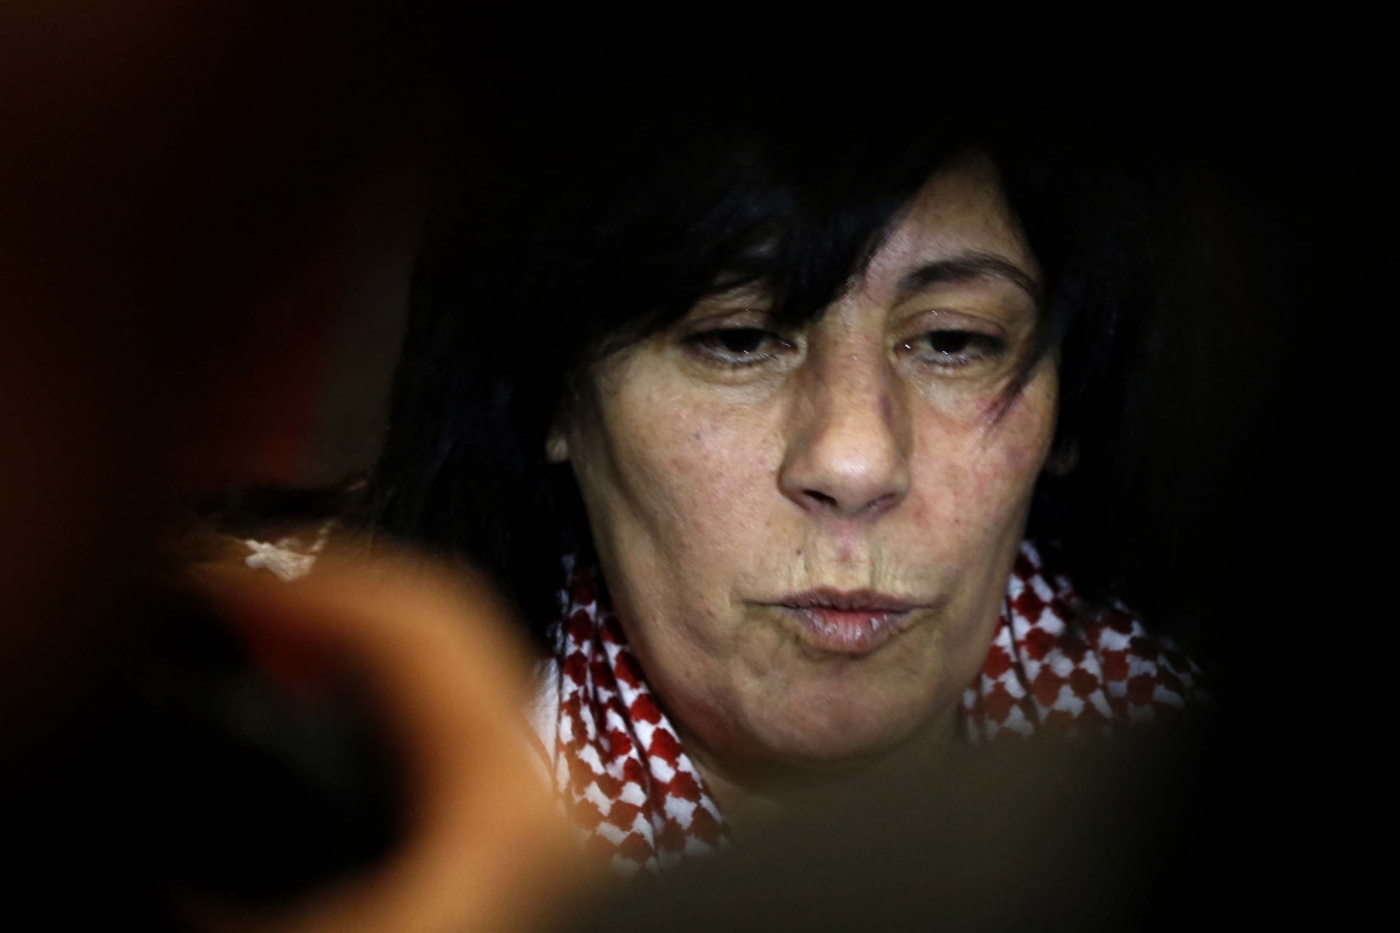 Jarrar - a member of the Marxist-Leninist organisation the Popular Front for Liberation of Palestine - was sentenced in March to two years in prison.